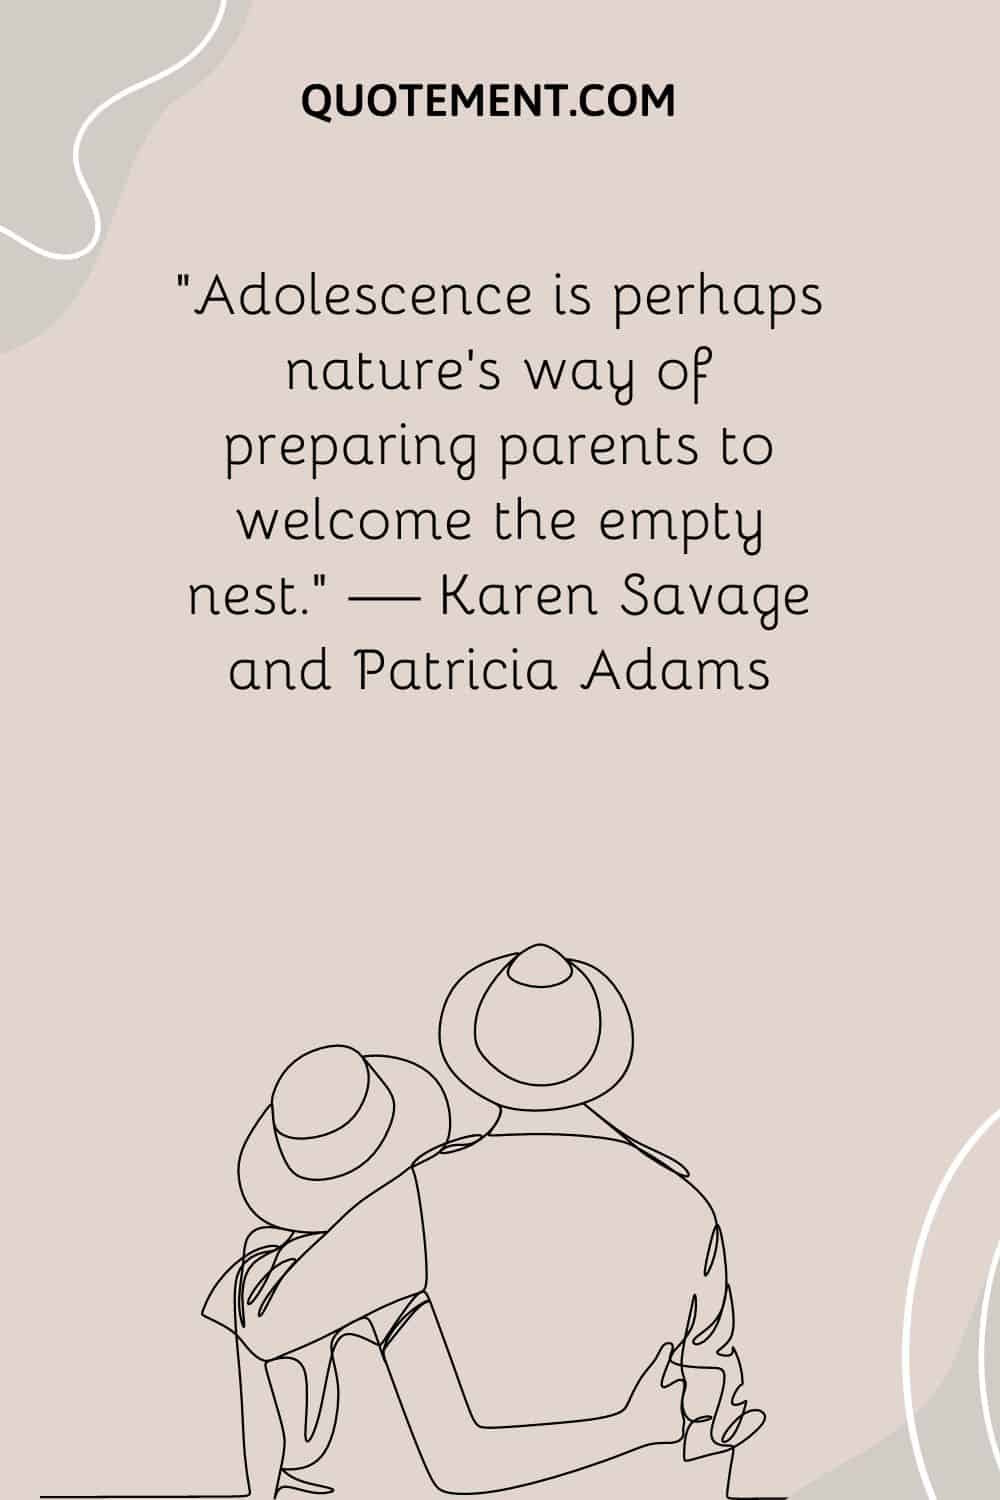 “Adolescence is perhaps nature’s way of preparing parents to welcome the empty nest.” — Karen Savage and Patricia Adams